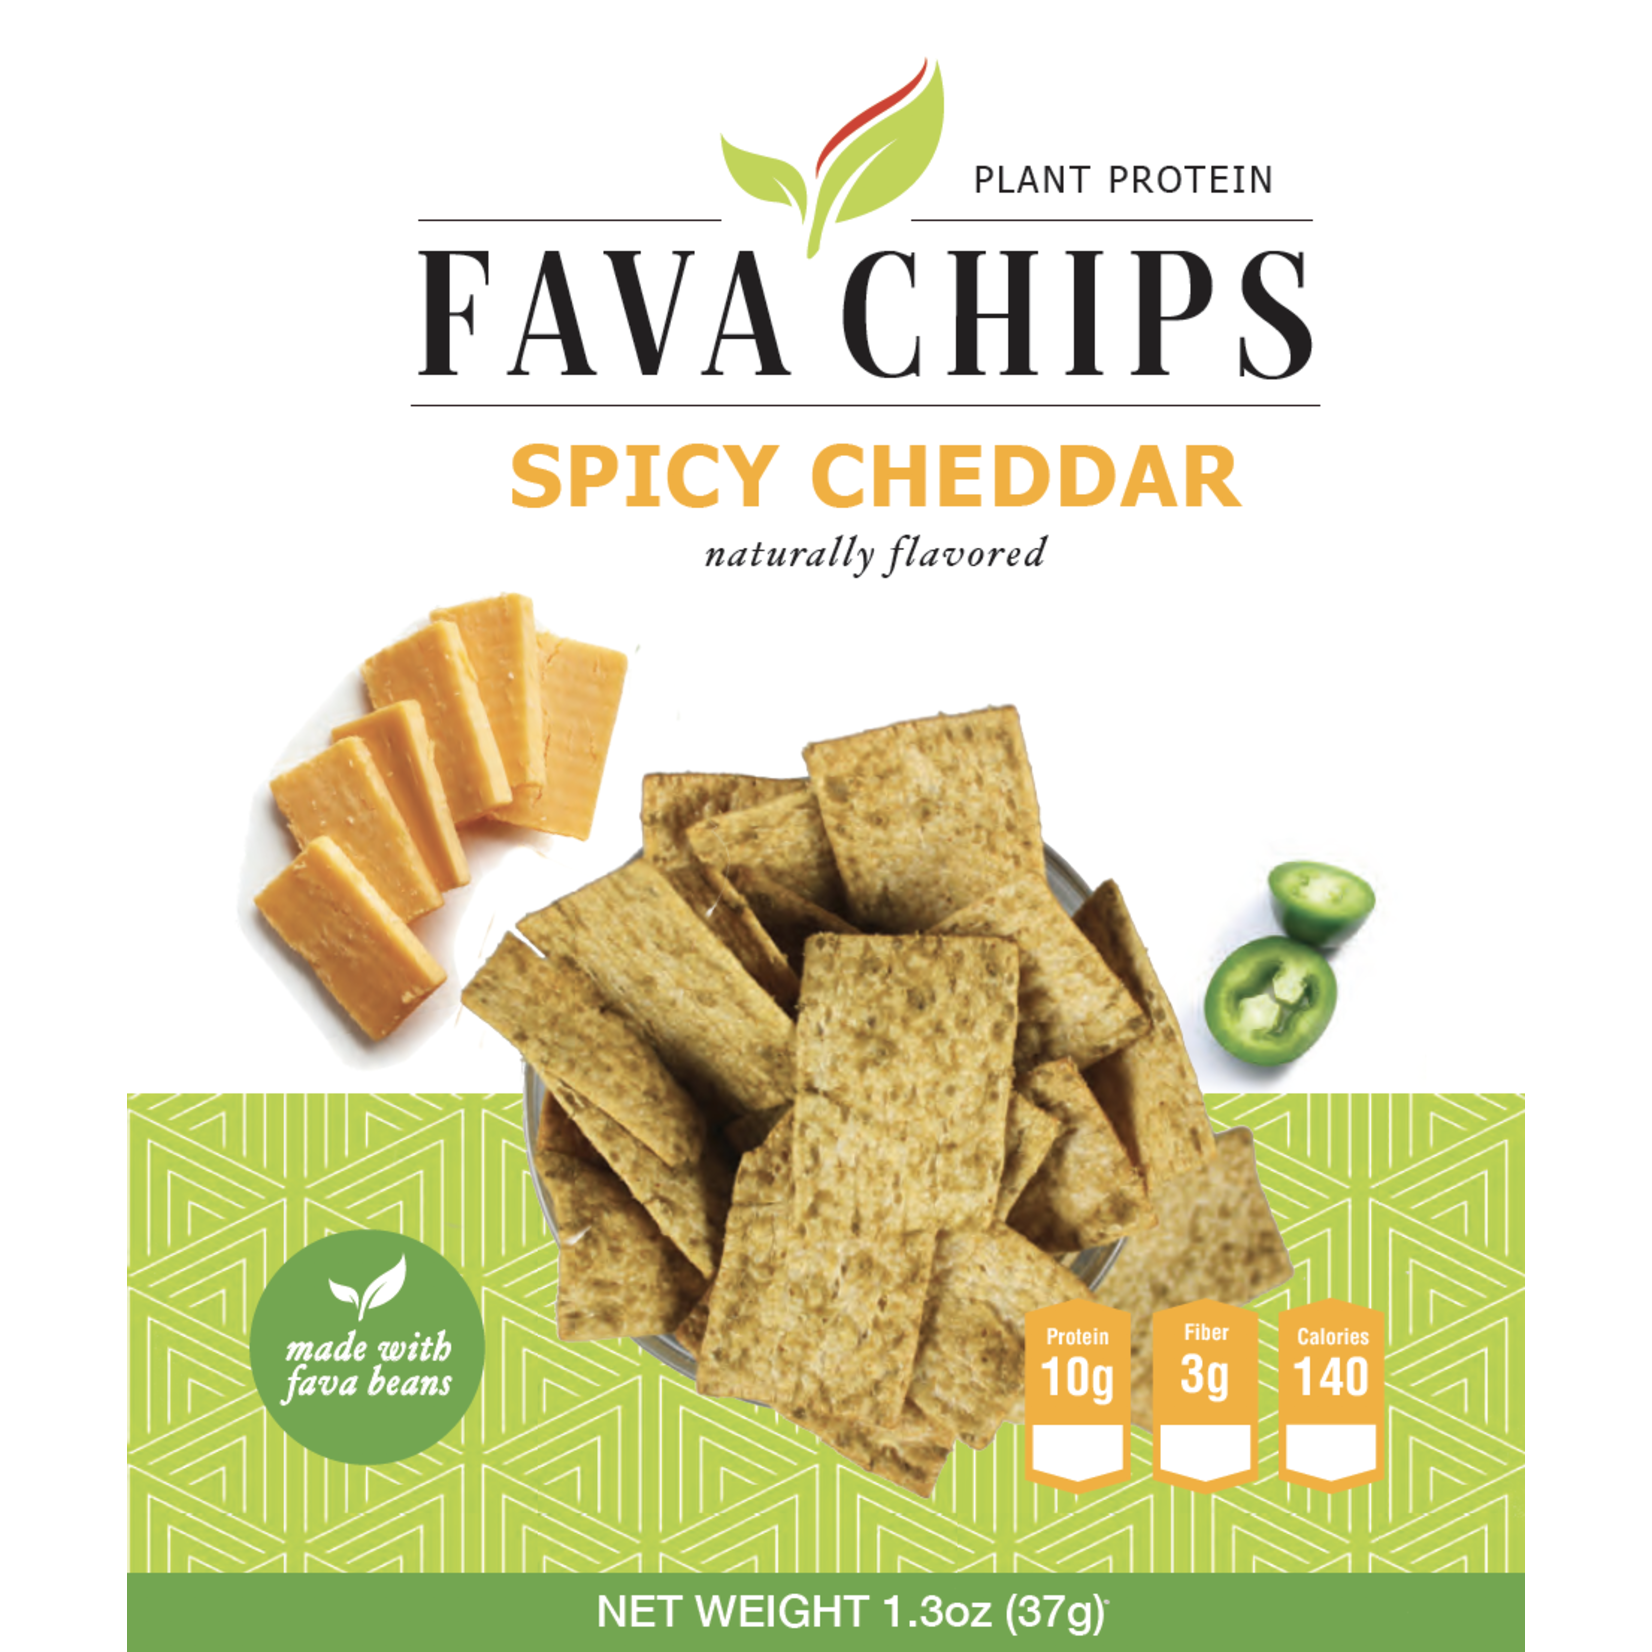 Fava Chips Spicy Cheddar